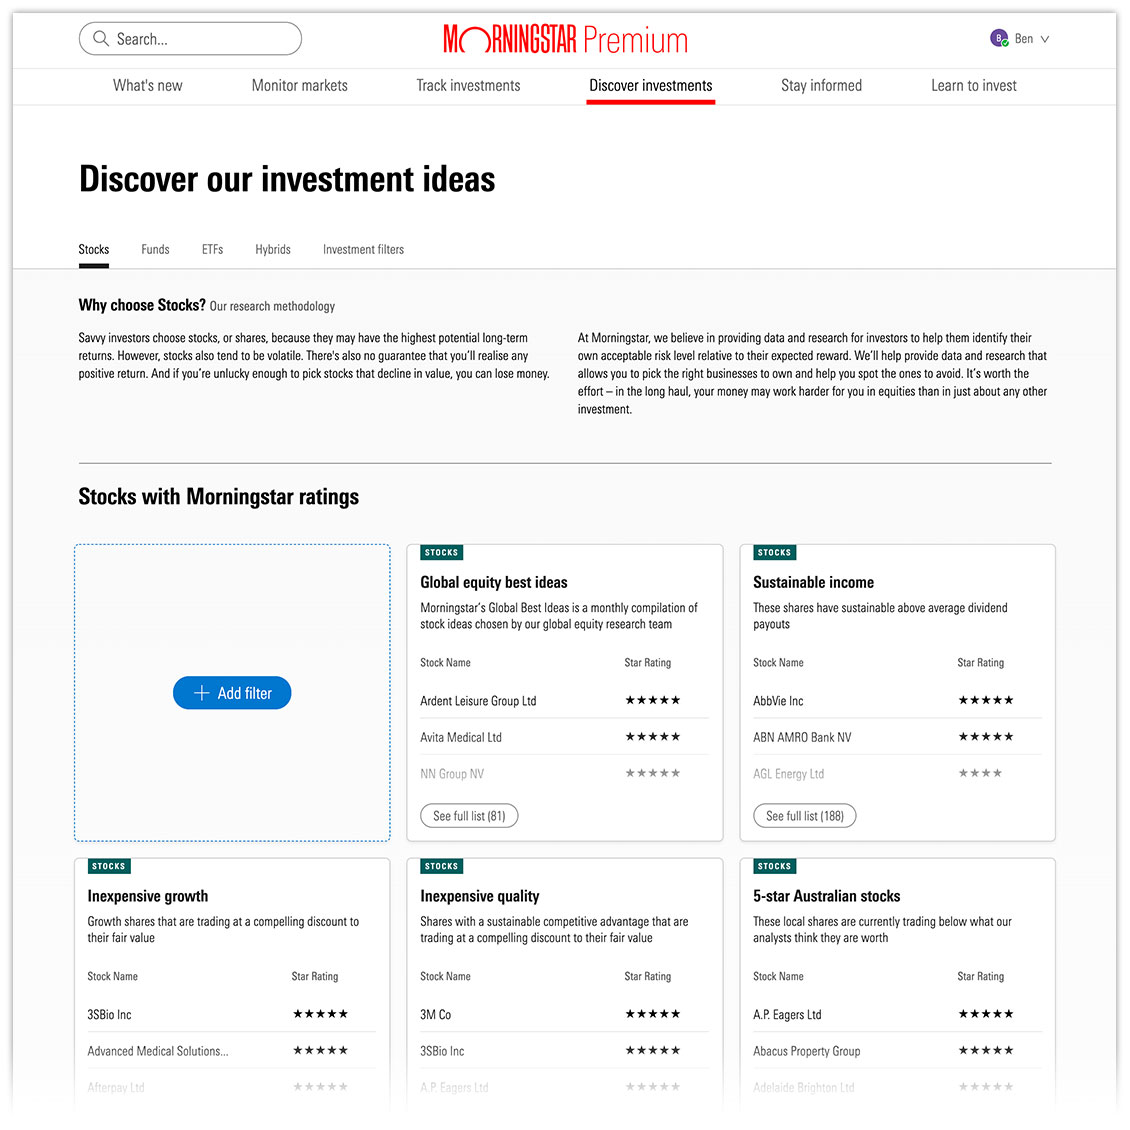 image of the Stock screener landing page